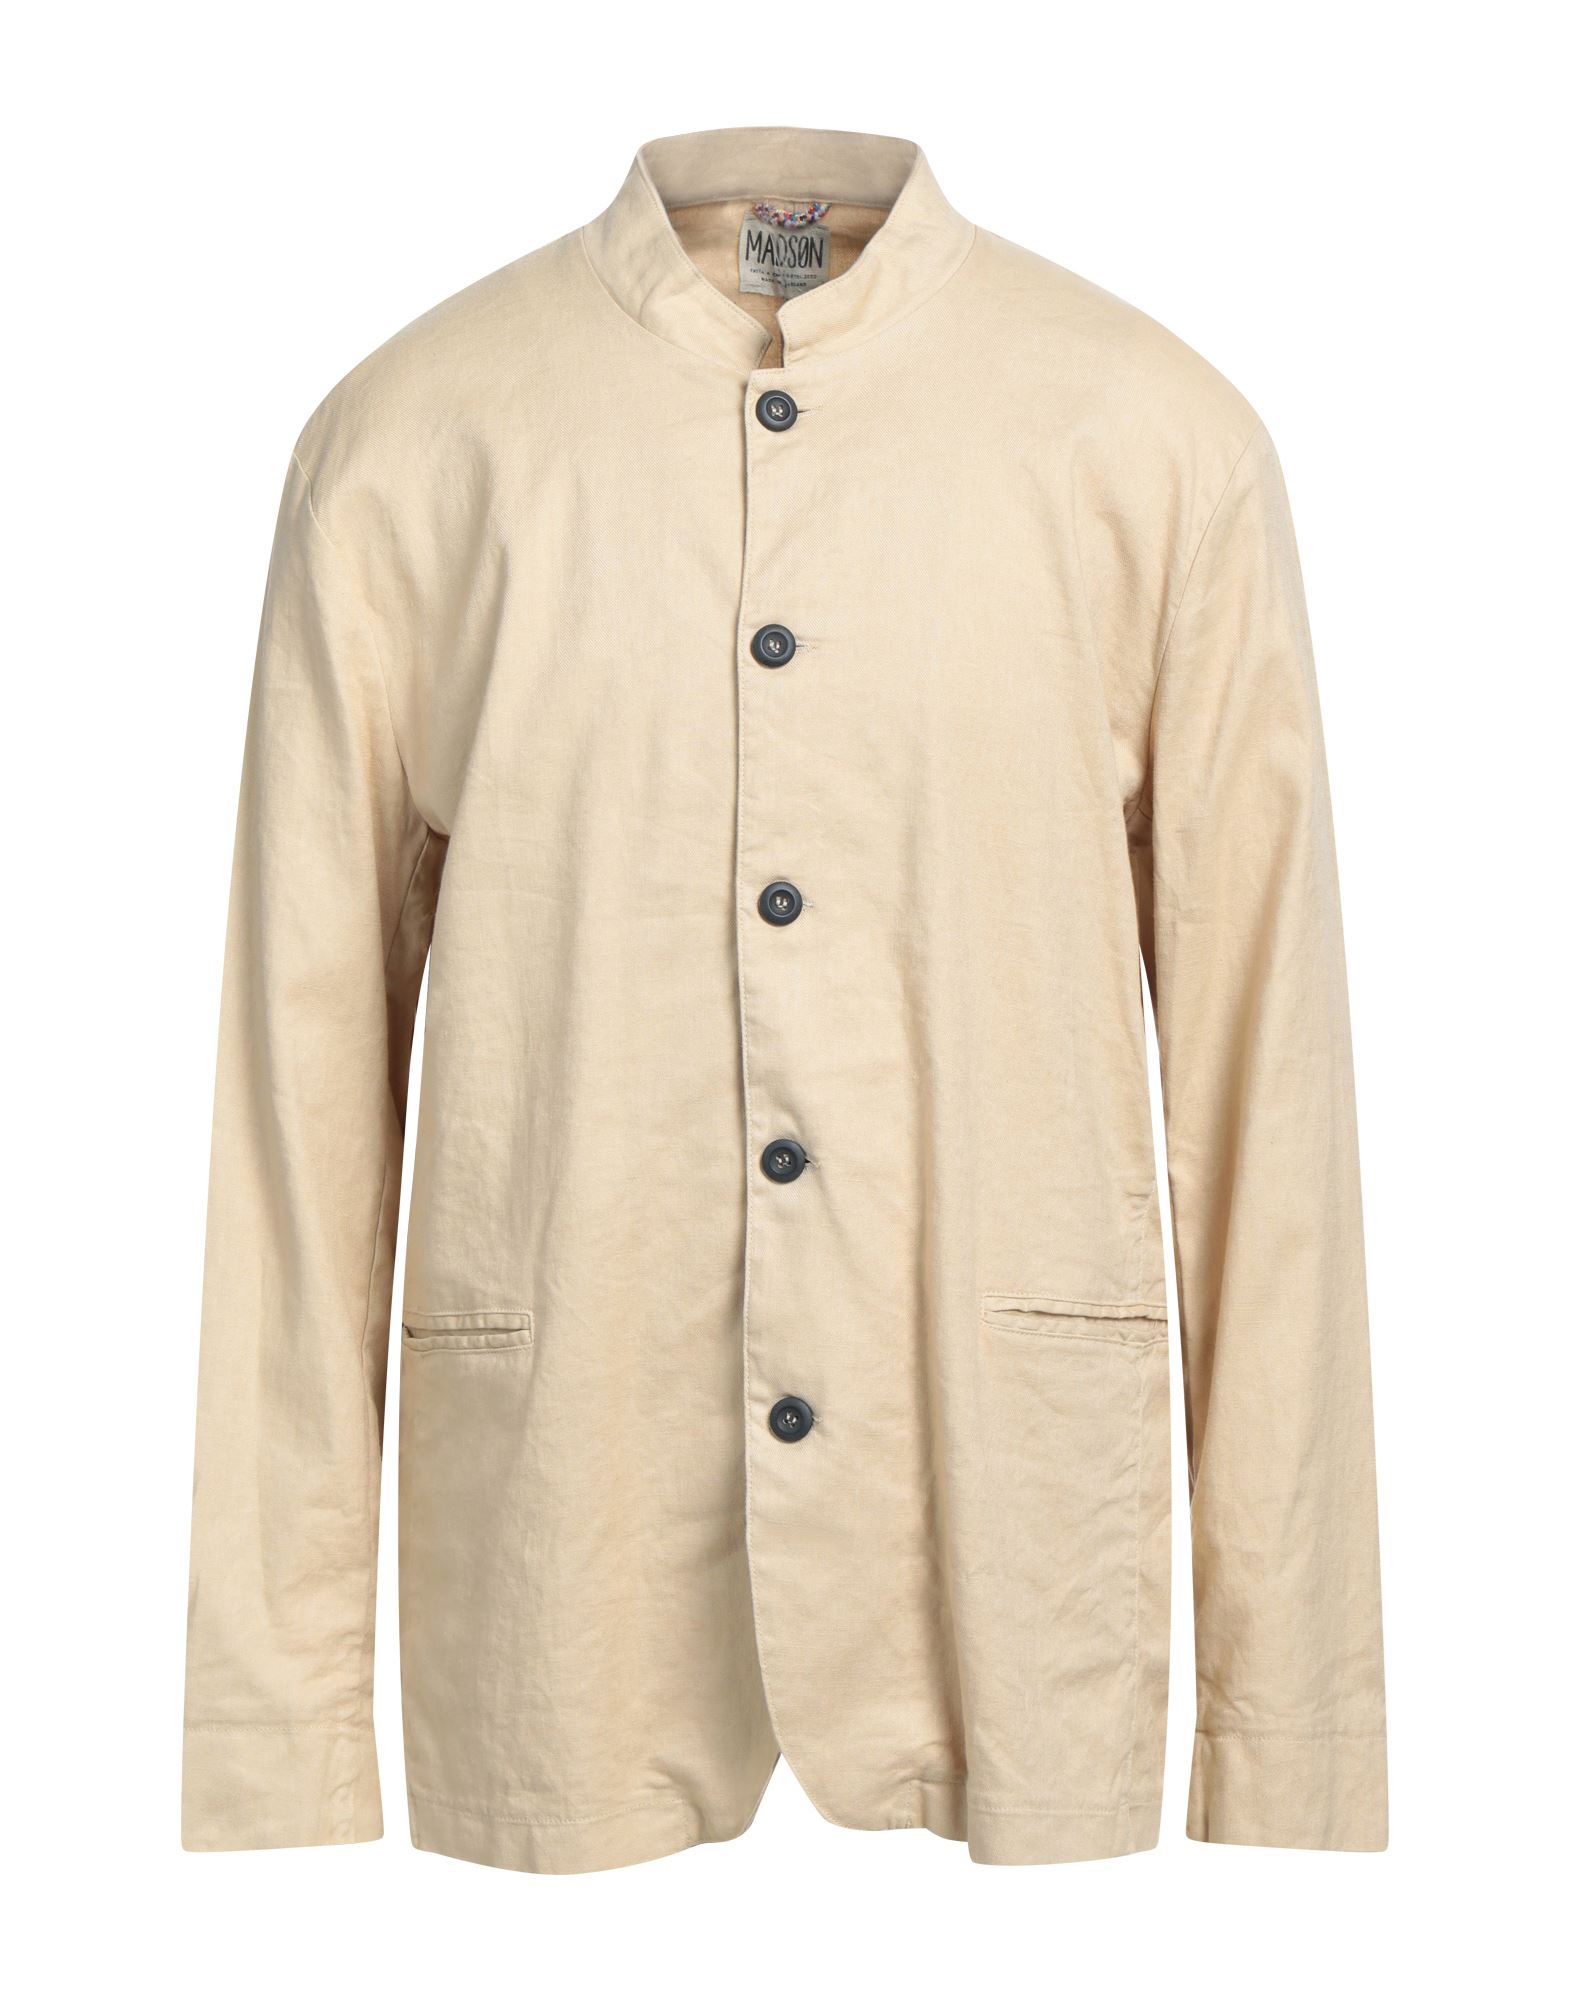 Madson Suit Jackets In Neutral